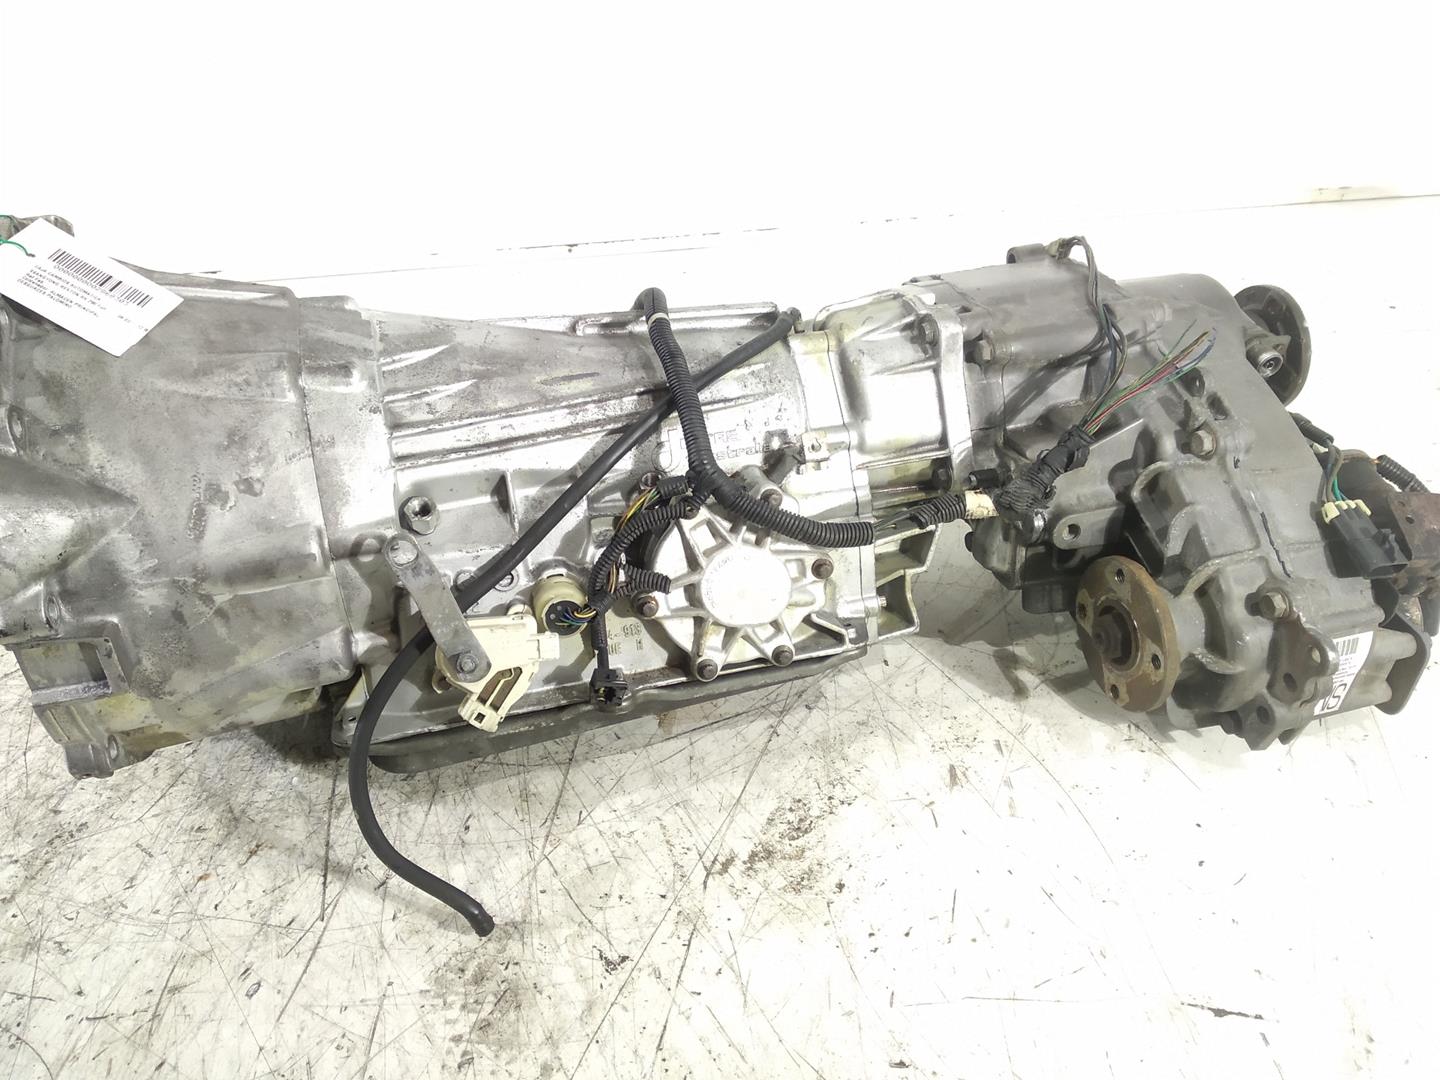 SSANGYONG Rexton Y200 (2001-2007) Gearbox 220943847, 220943847, 220943847 24513535